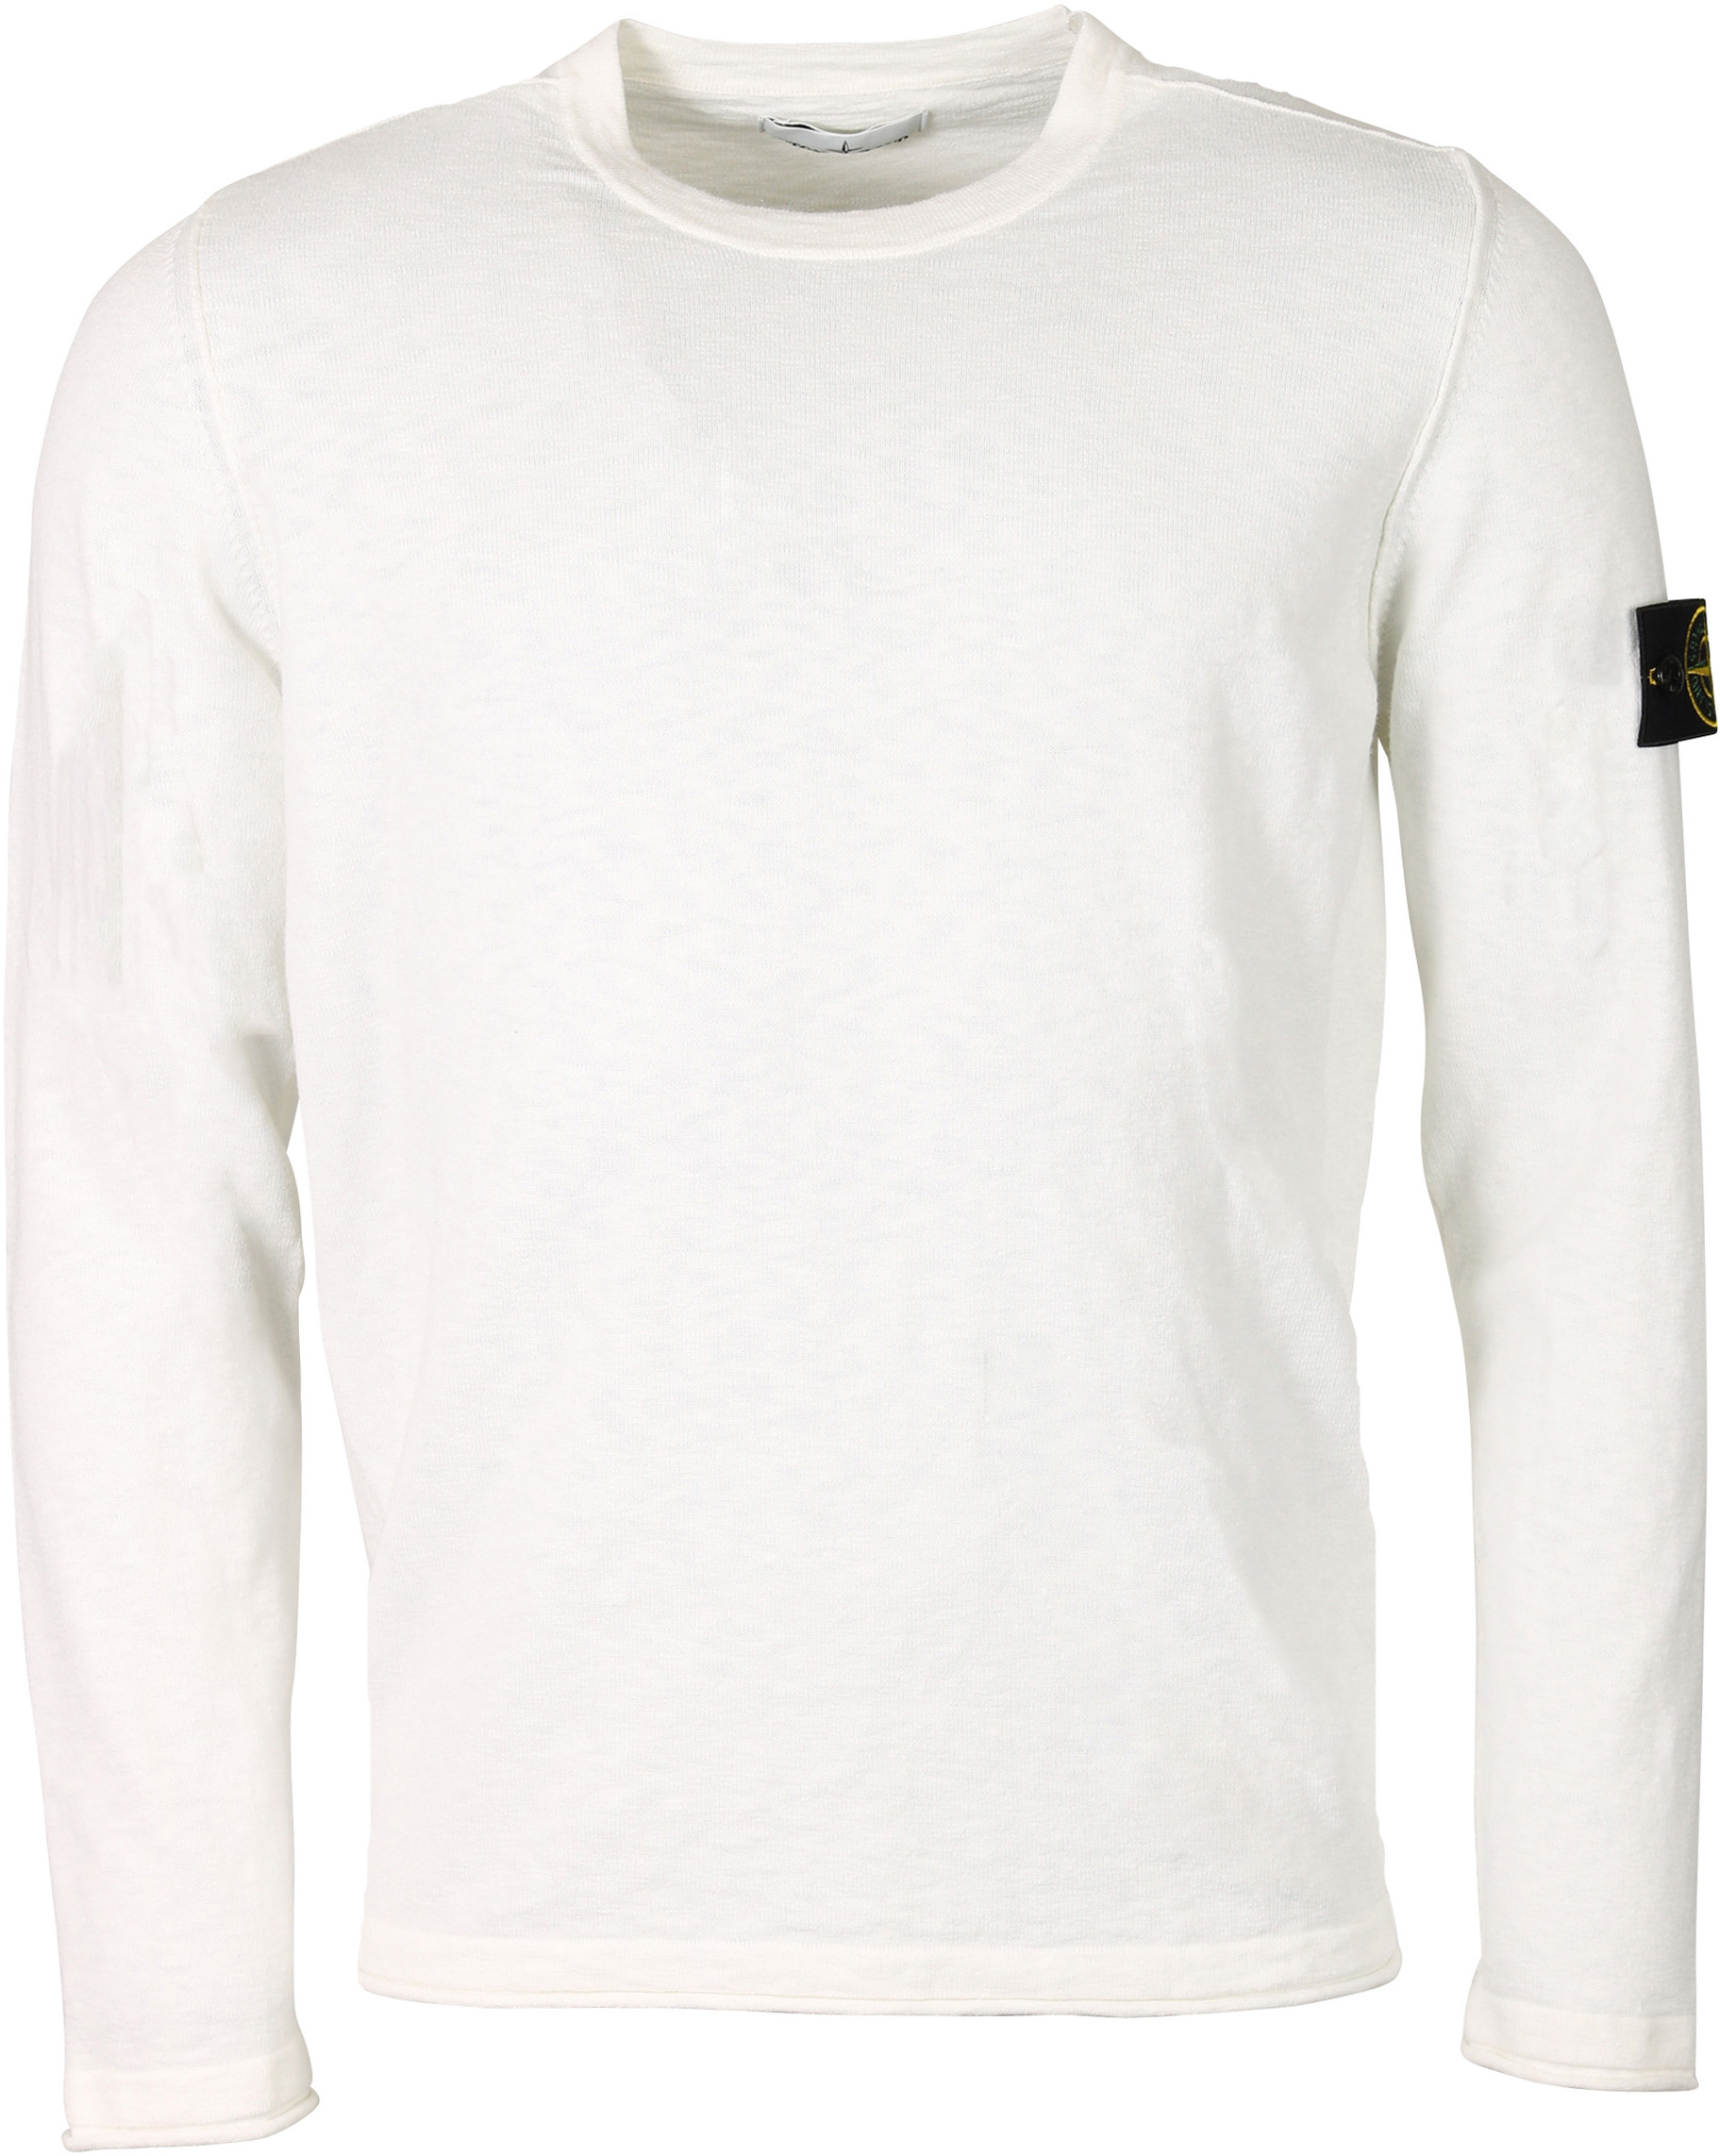 Stone Island Knit Pullover in White XL